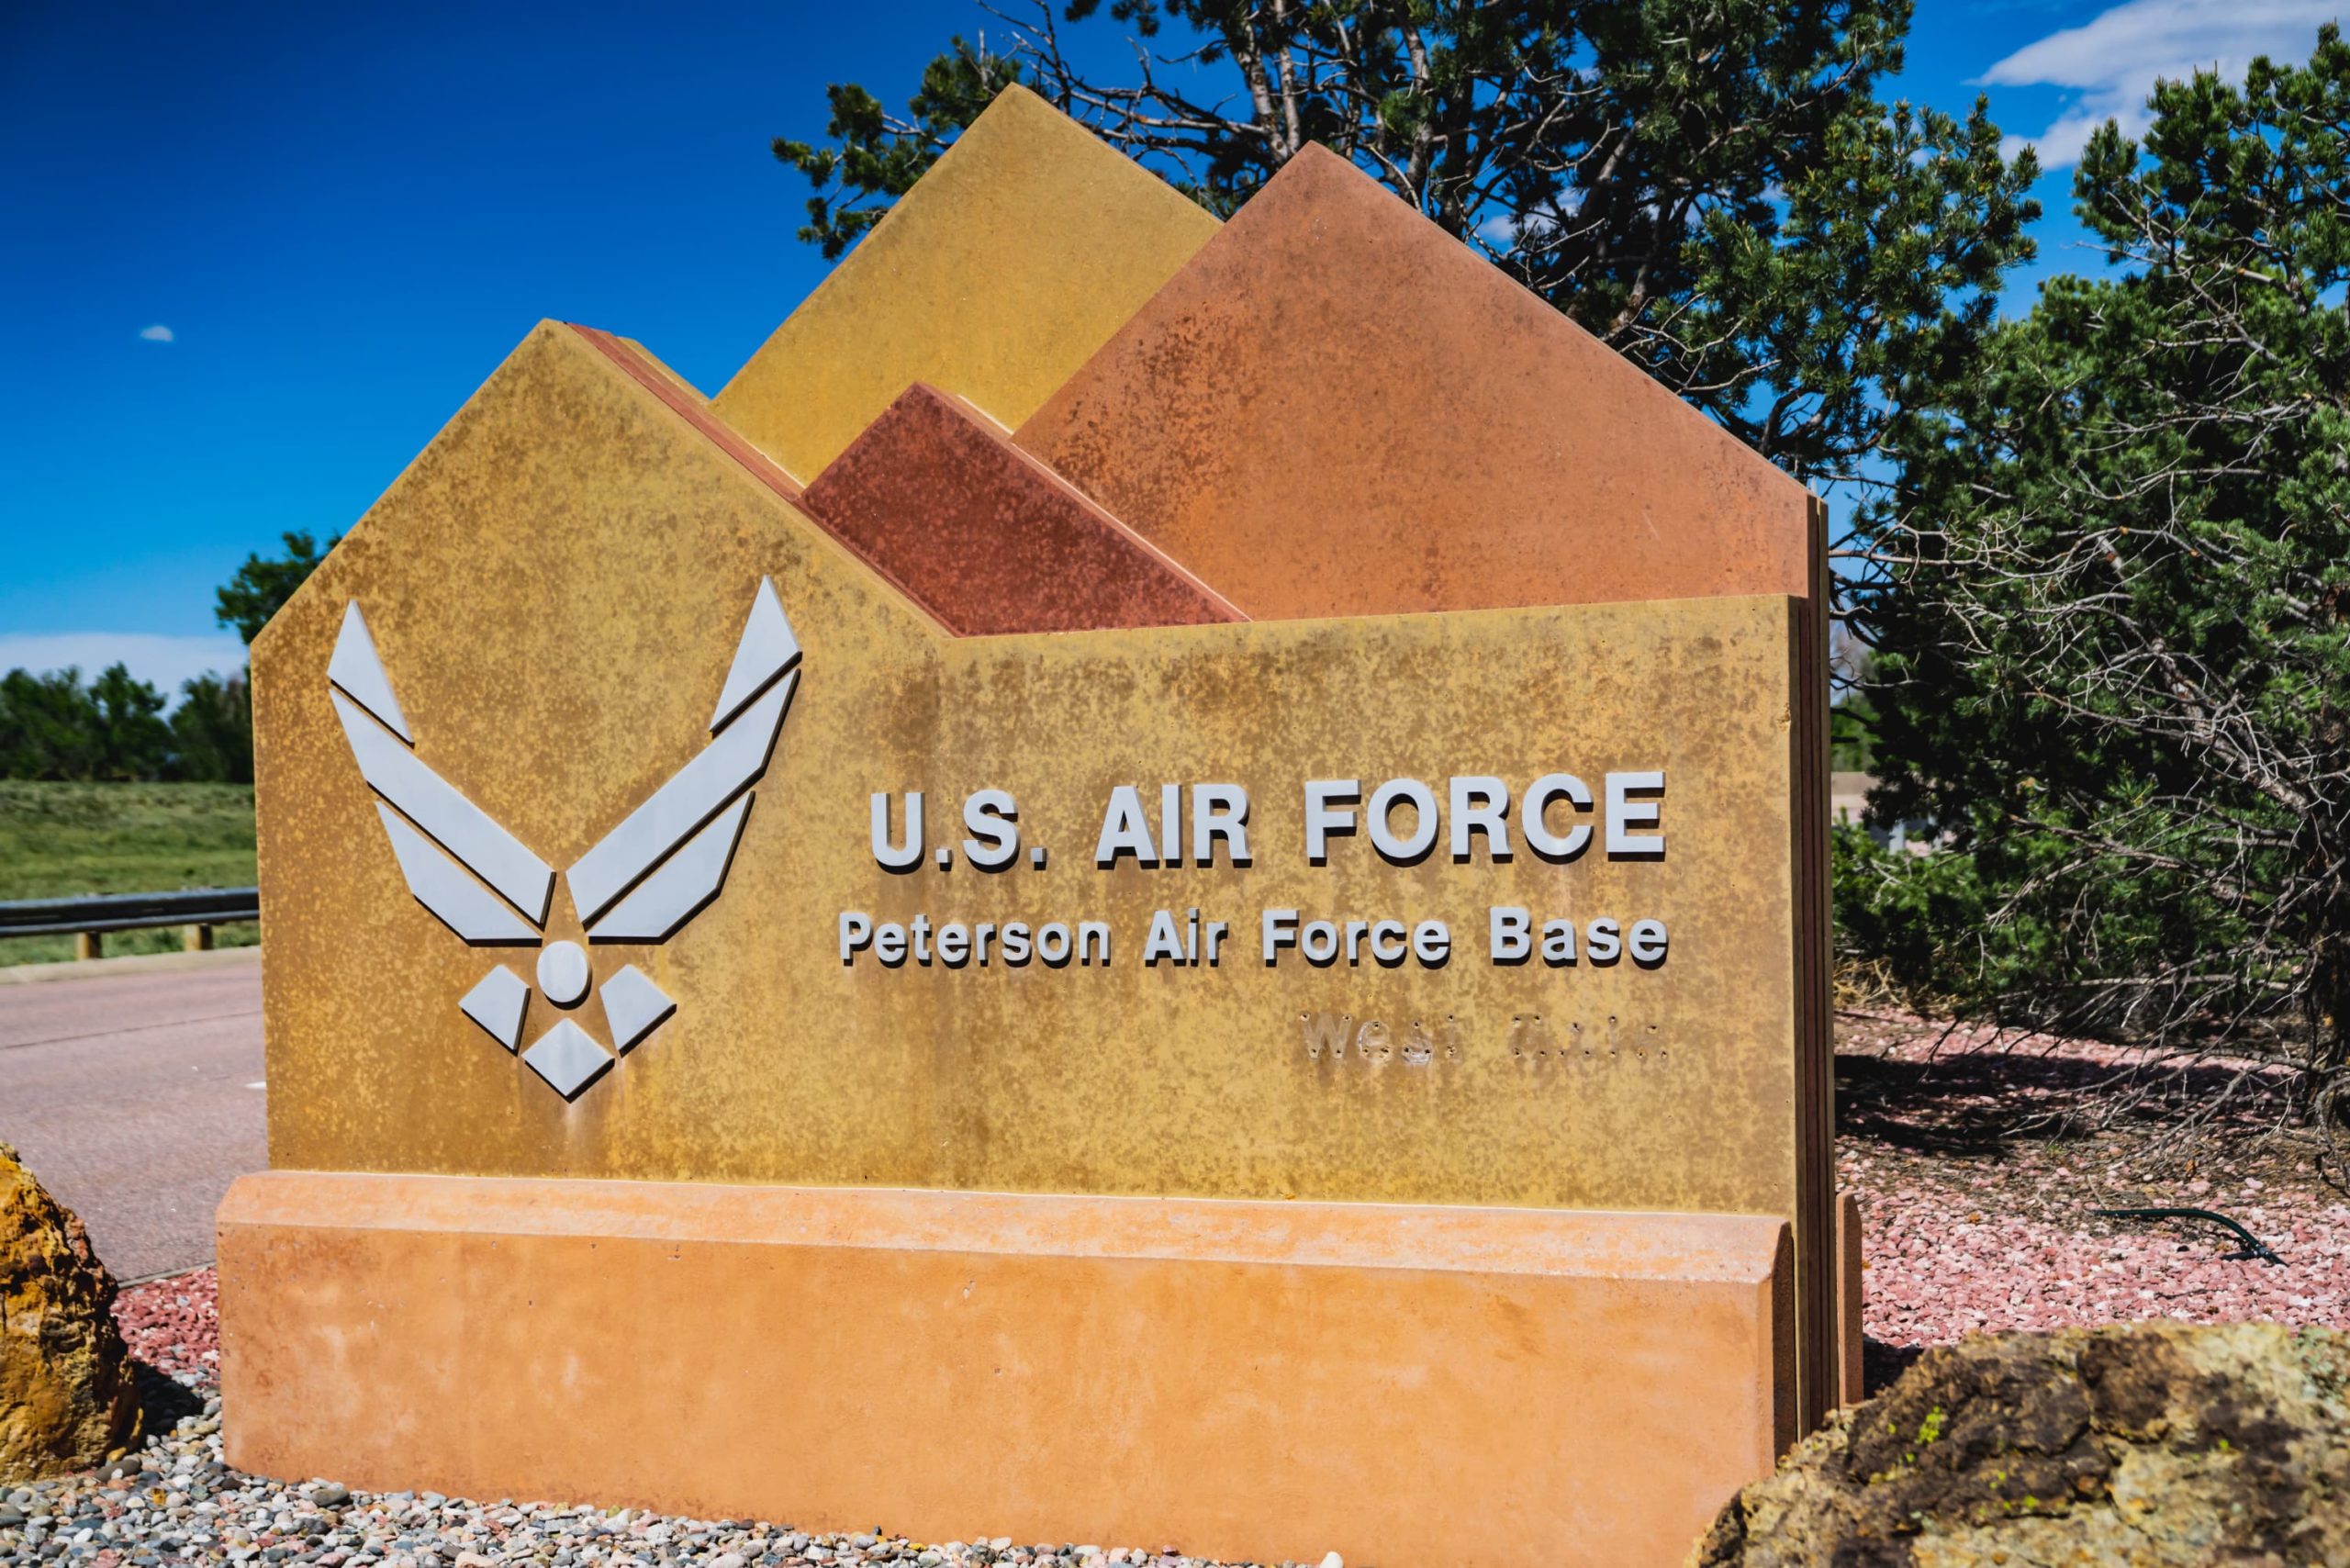 A sign for U.S. Air Force Peterson Air Force Base.